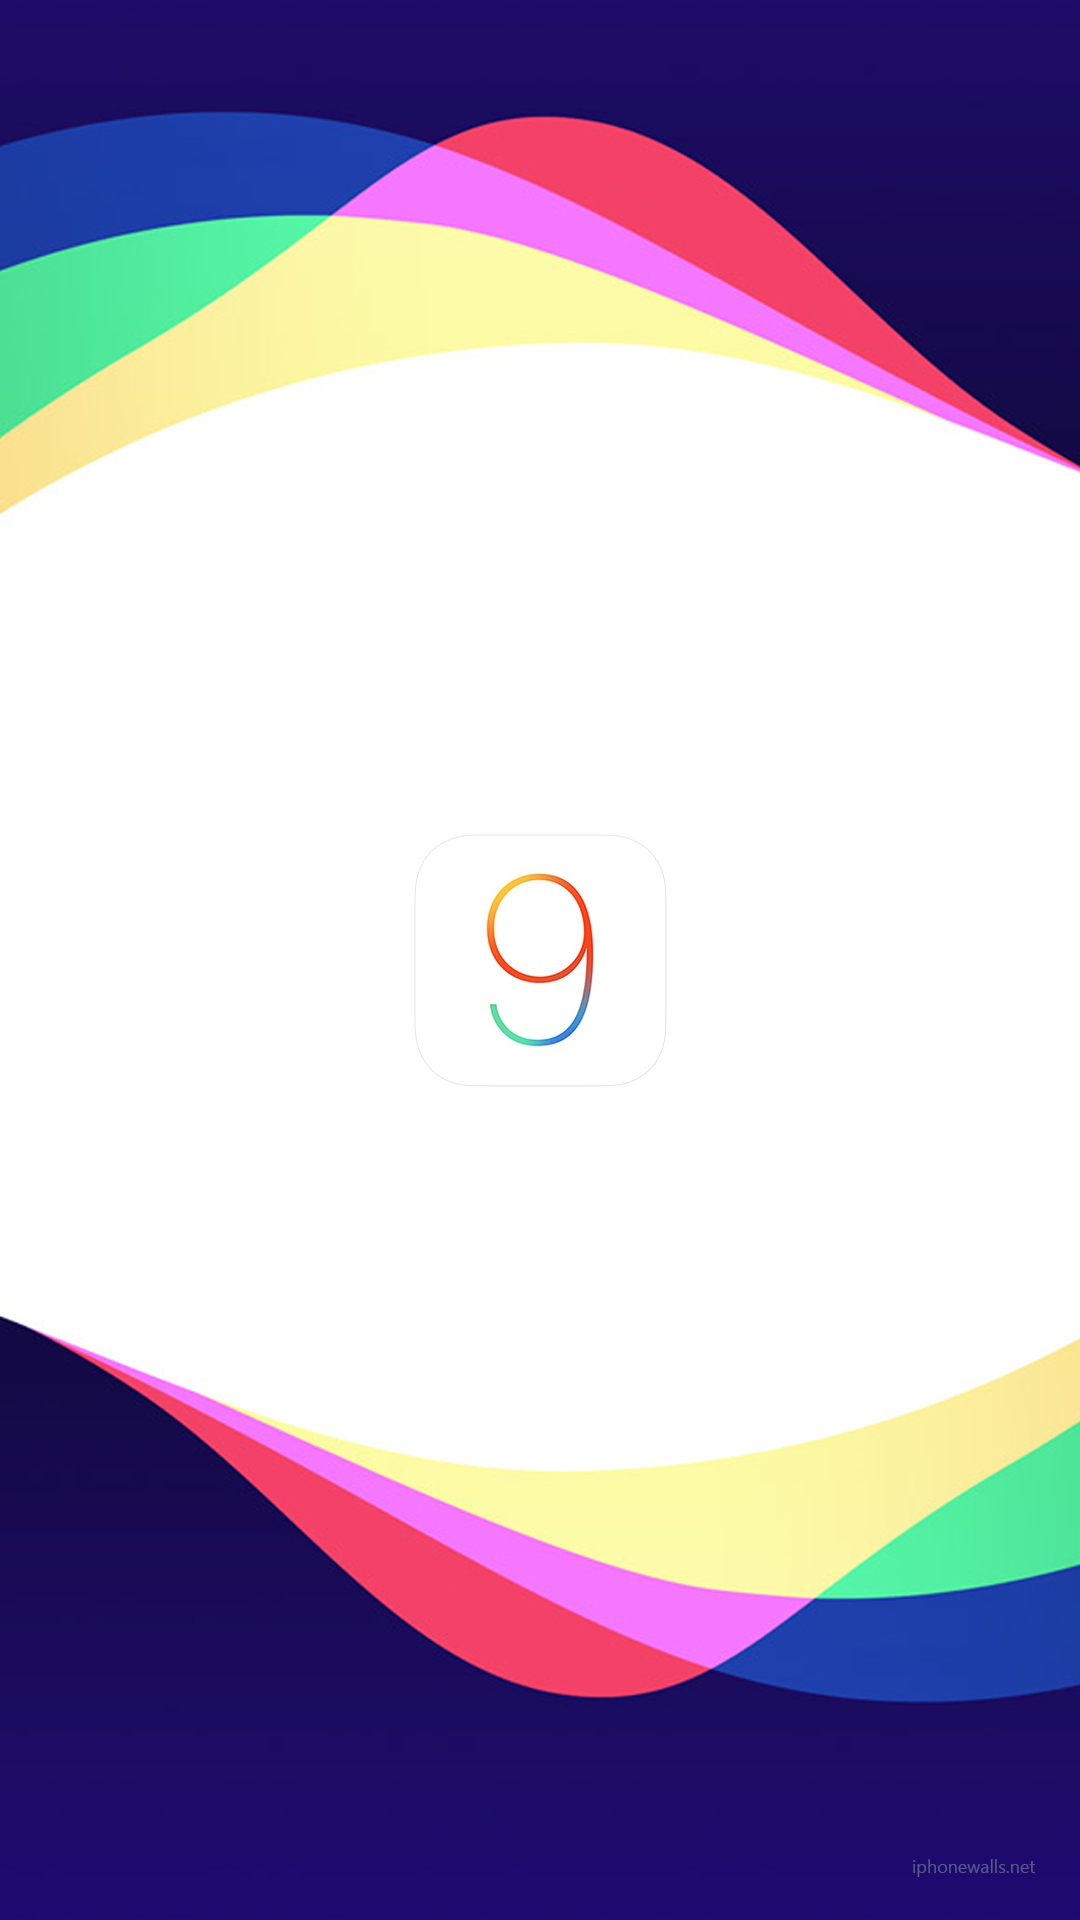 Apple September 9 2015 Special Event iPhone 6 Plus HD Wallpaper